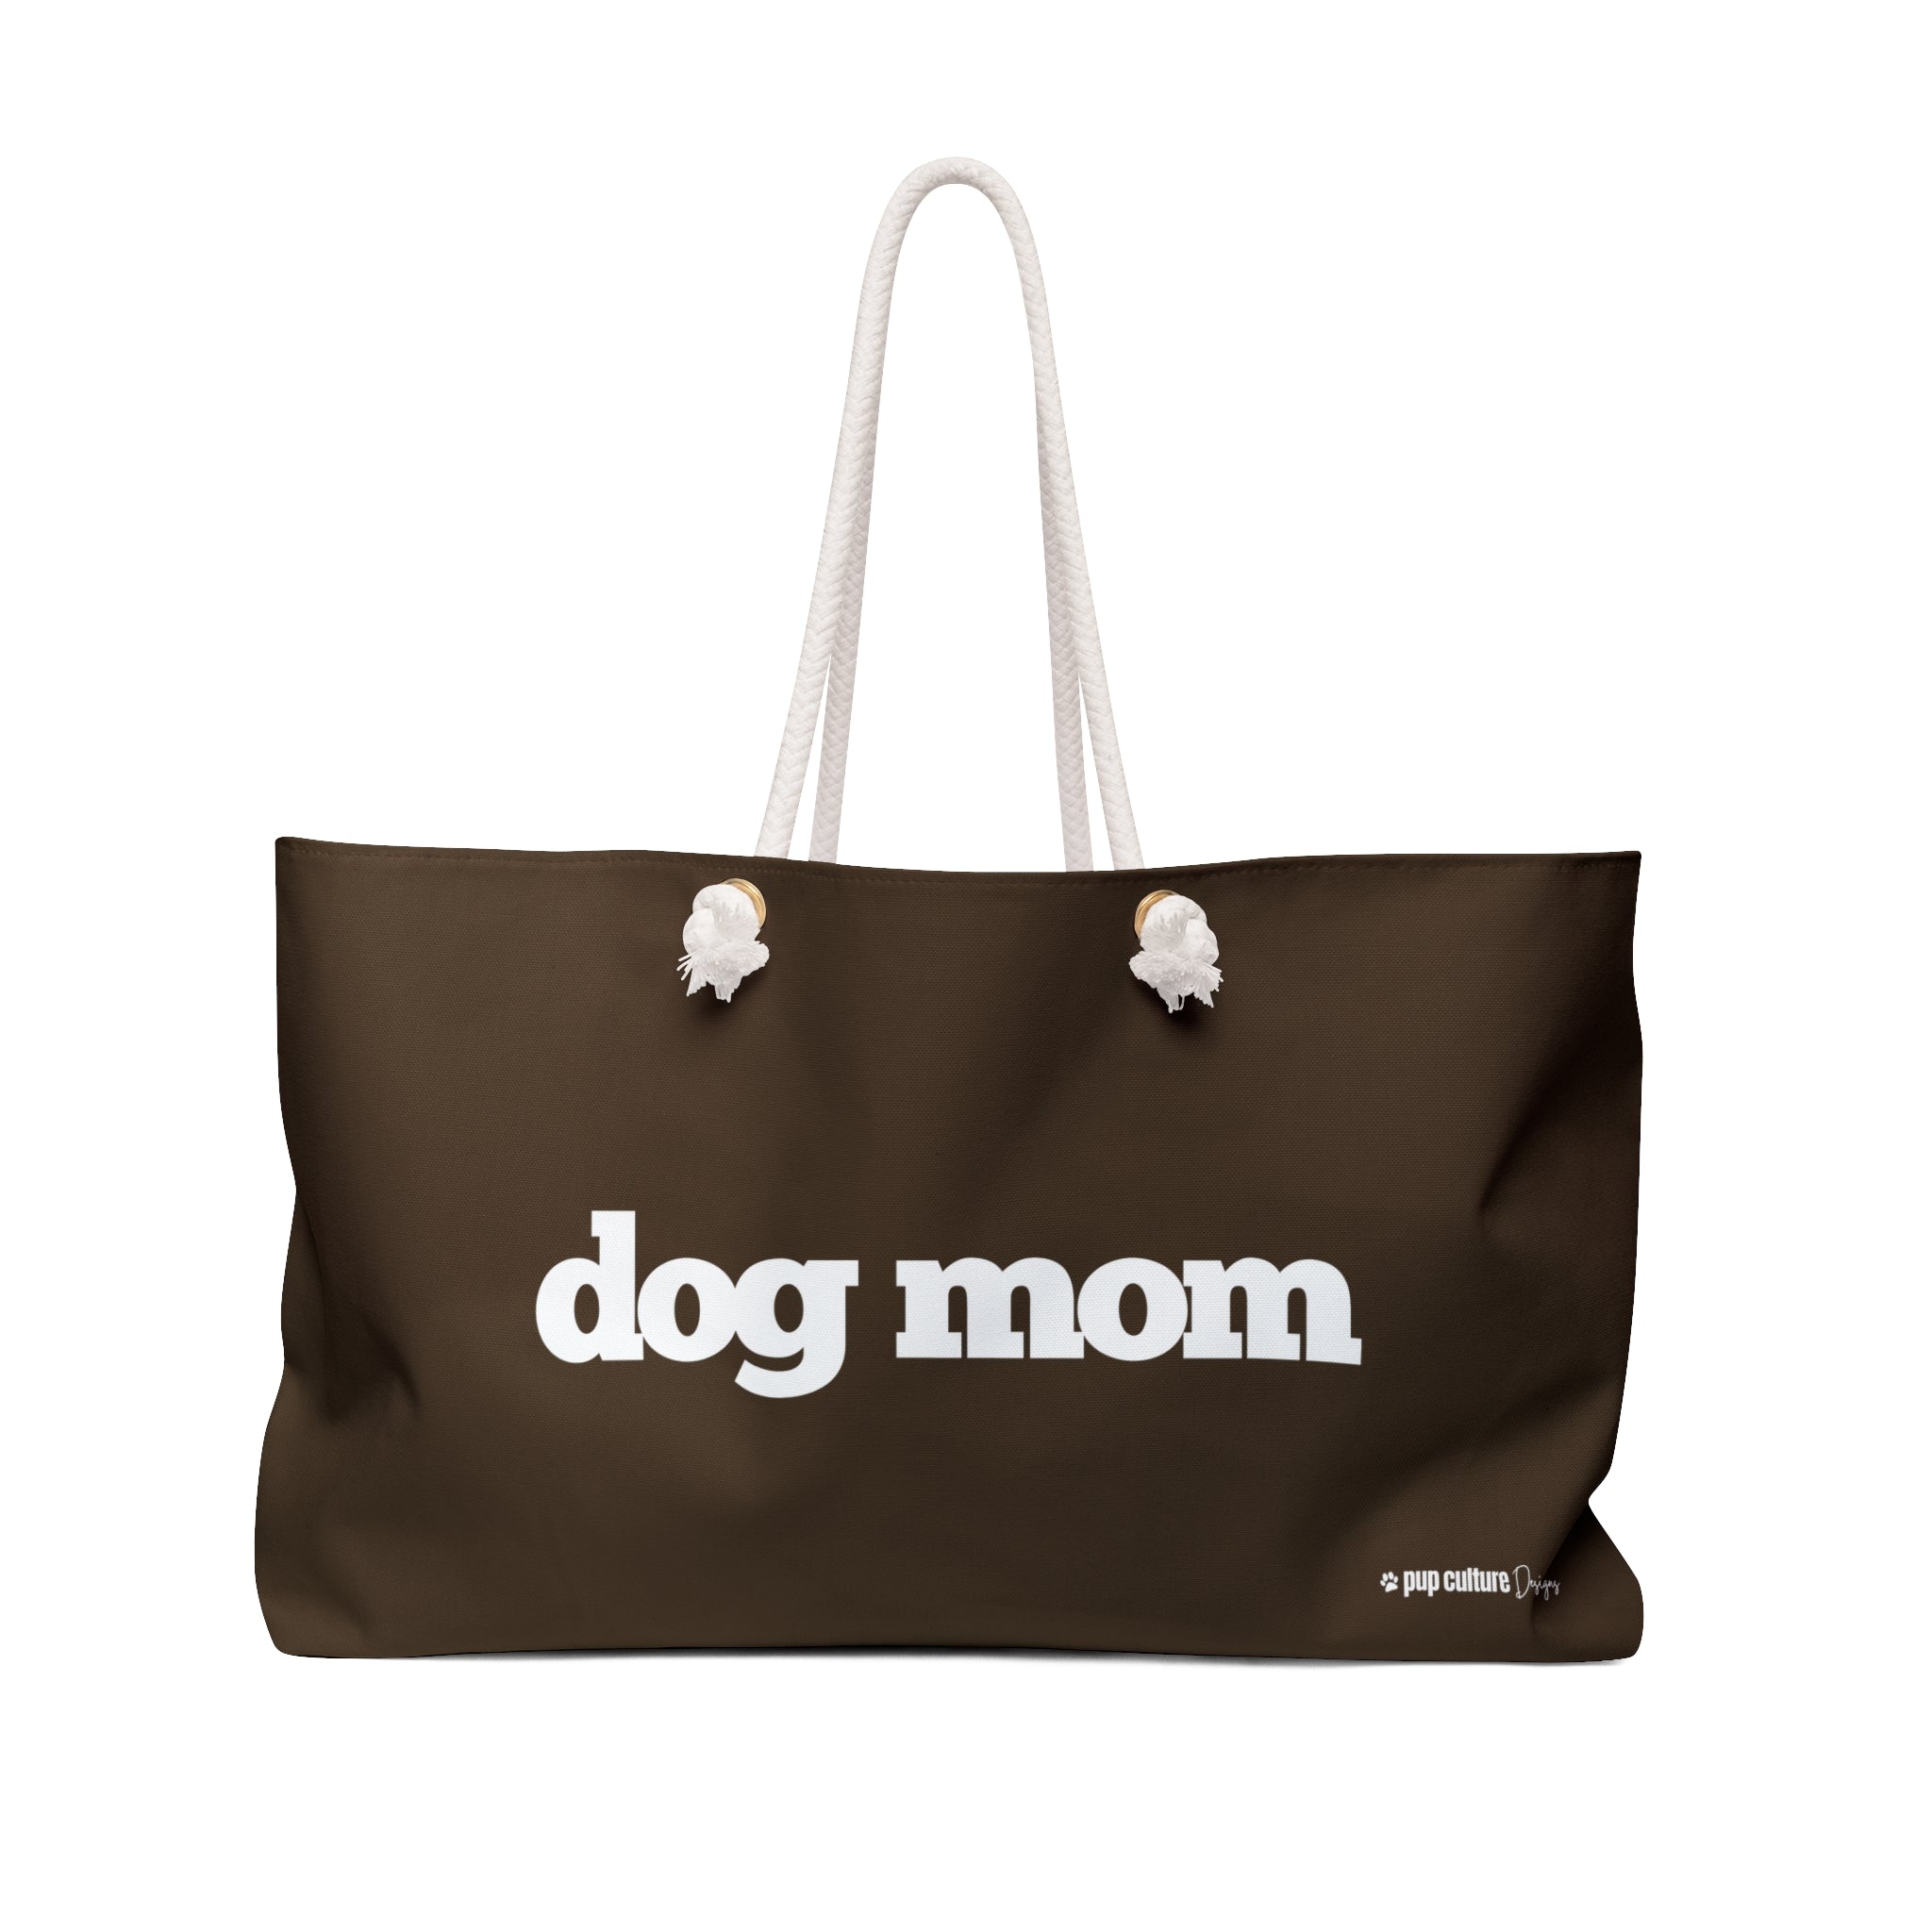 Dog Mom Double Sided Market Tote Bag | Neutral Colors - dog-mom-neutral-farmers-market-tote-bag